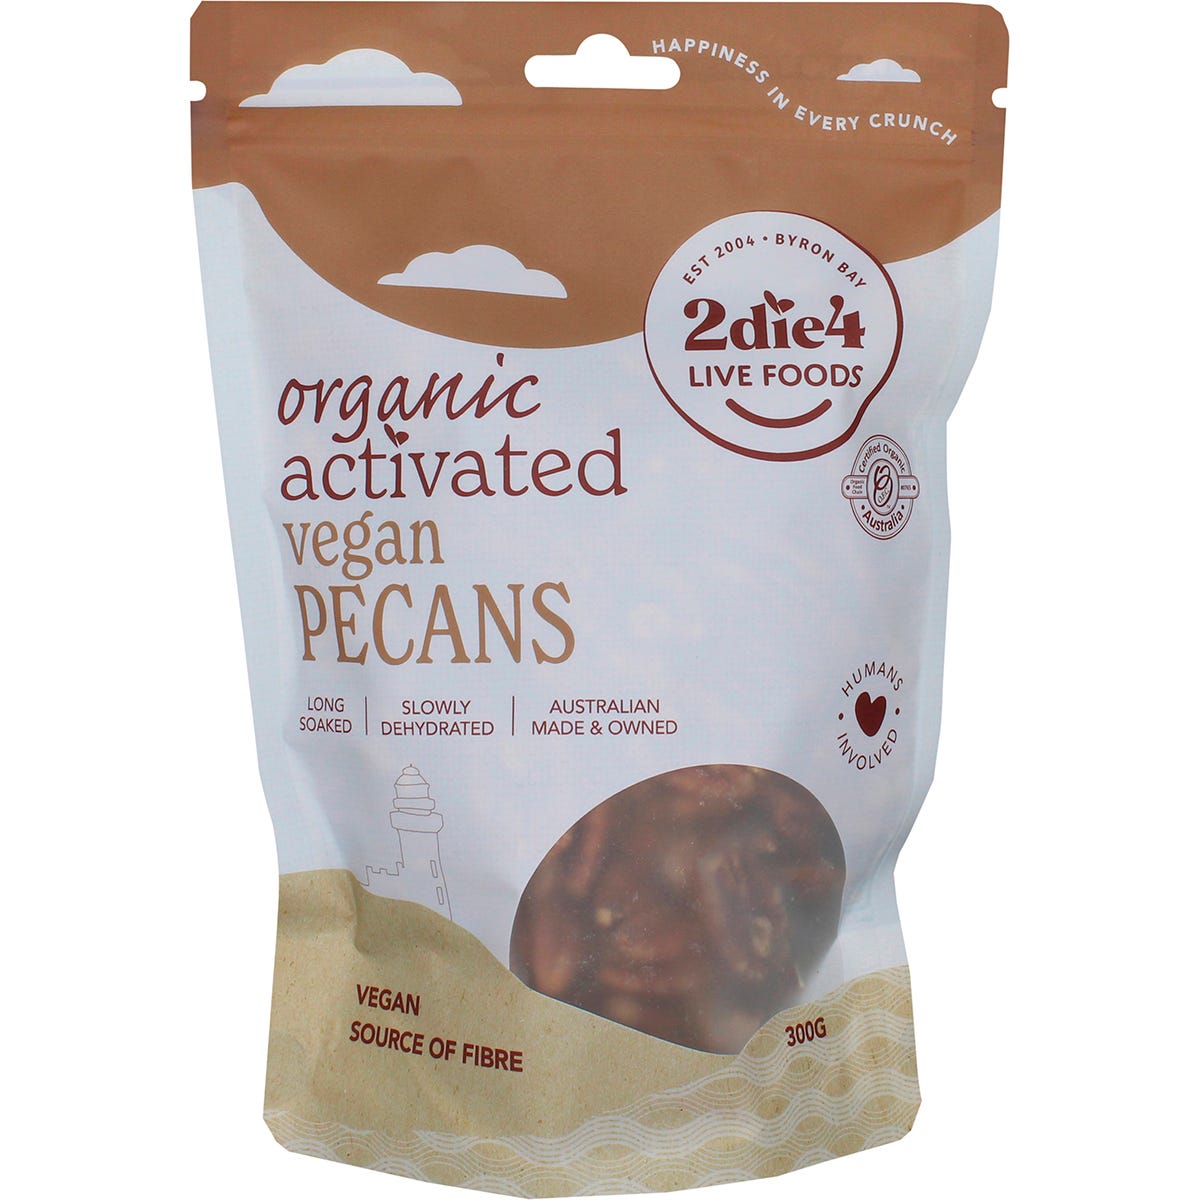 2die4 Live Foods Organic Activated Pecans Vegan 300g - Dr Earth - Dried Fruits Nuts & Seeds